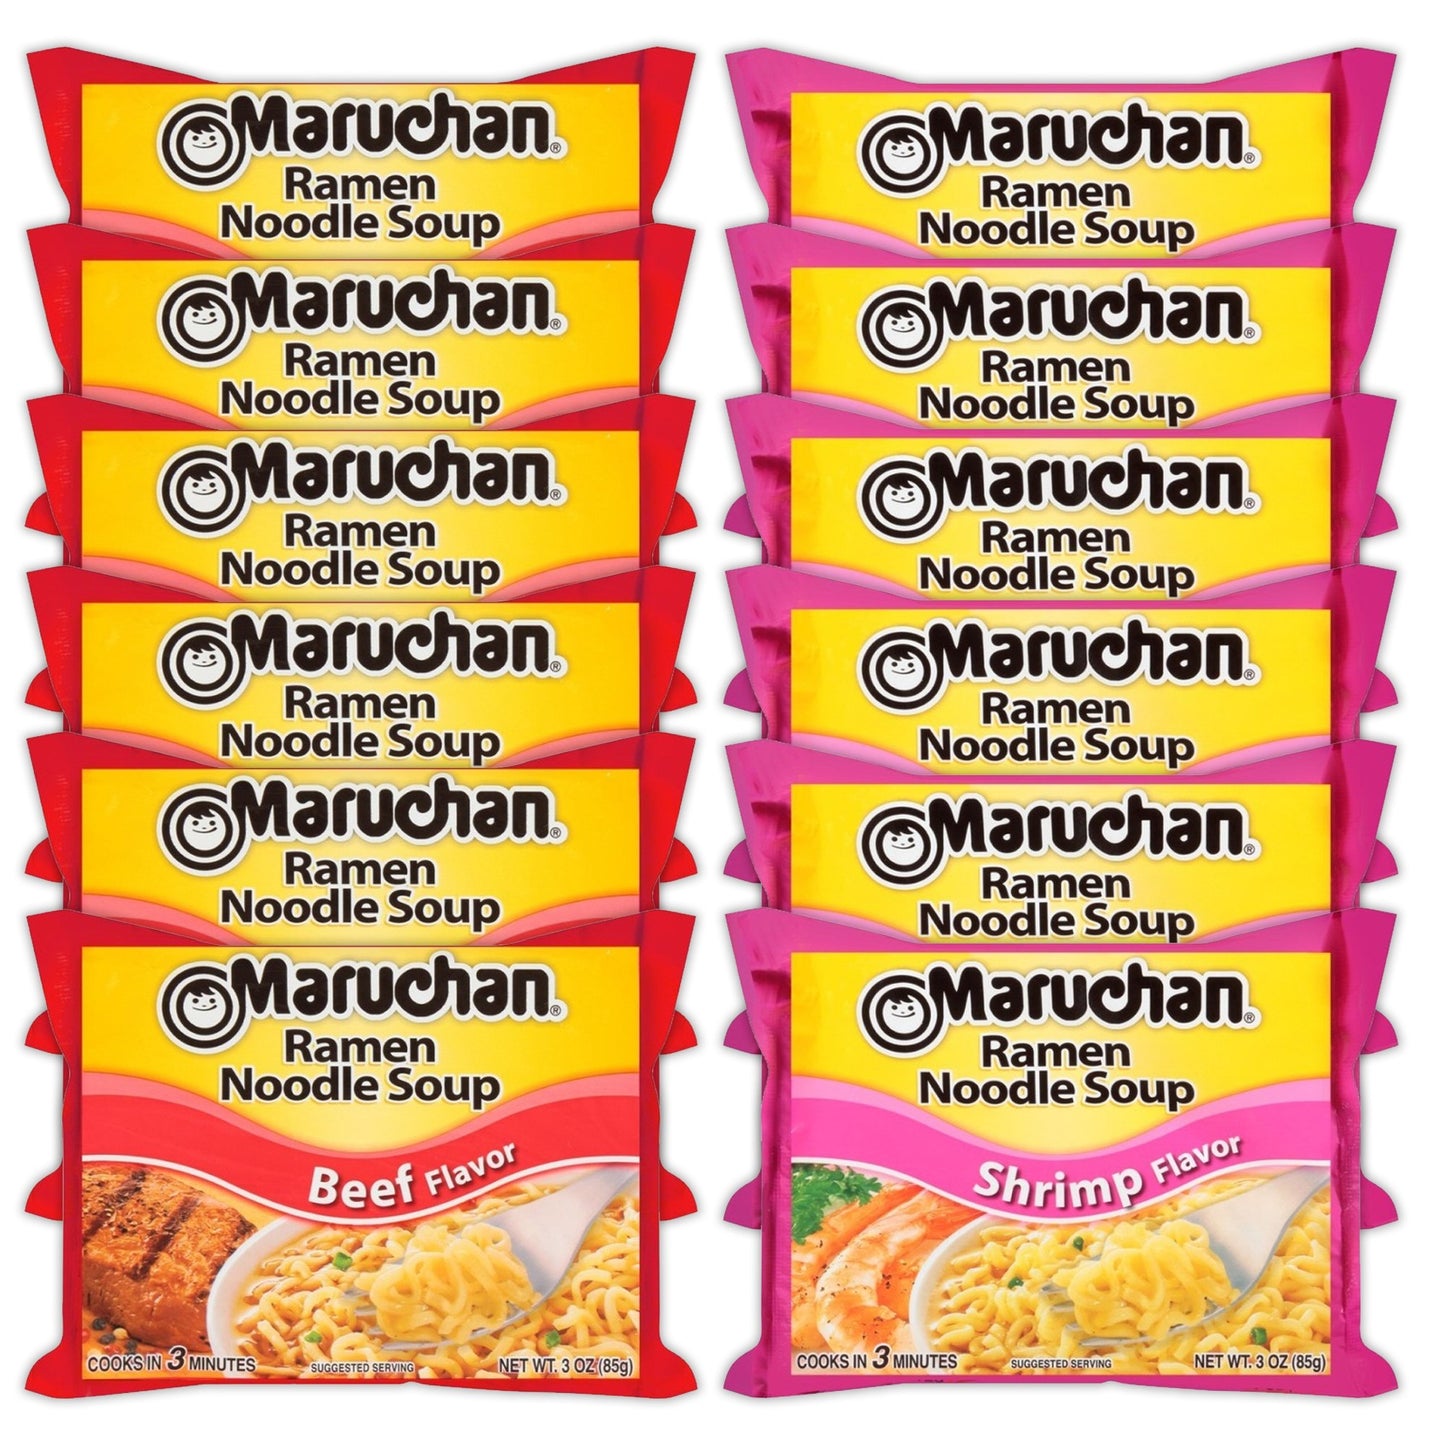 Maruchan Ramen Instant Noodle Soup Variety, 2 Flavors - 6 Packs Beef & 6 Packs Shrimp , 3 Ounce Single Servings Lunch / Dinner Variety